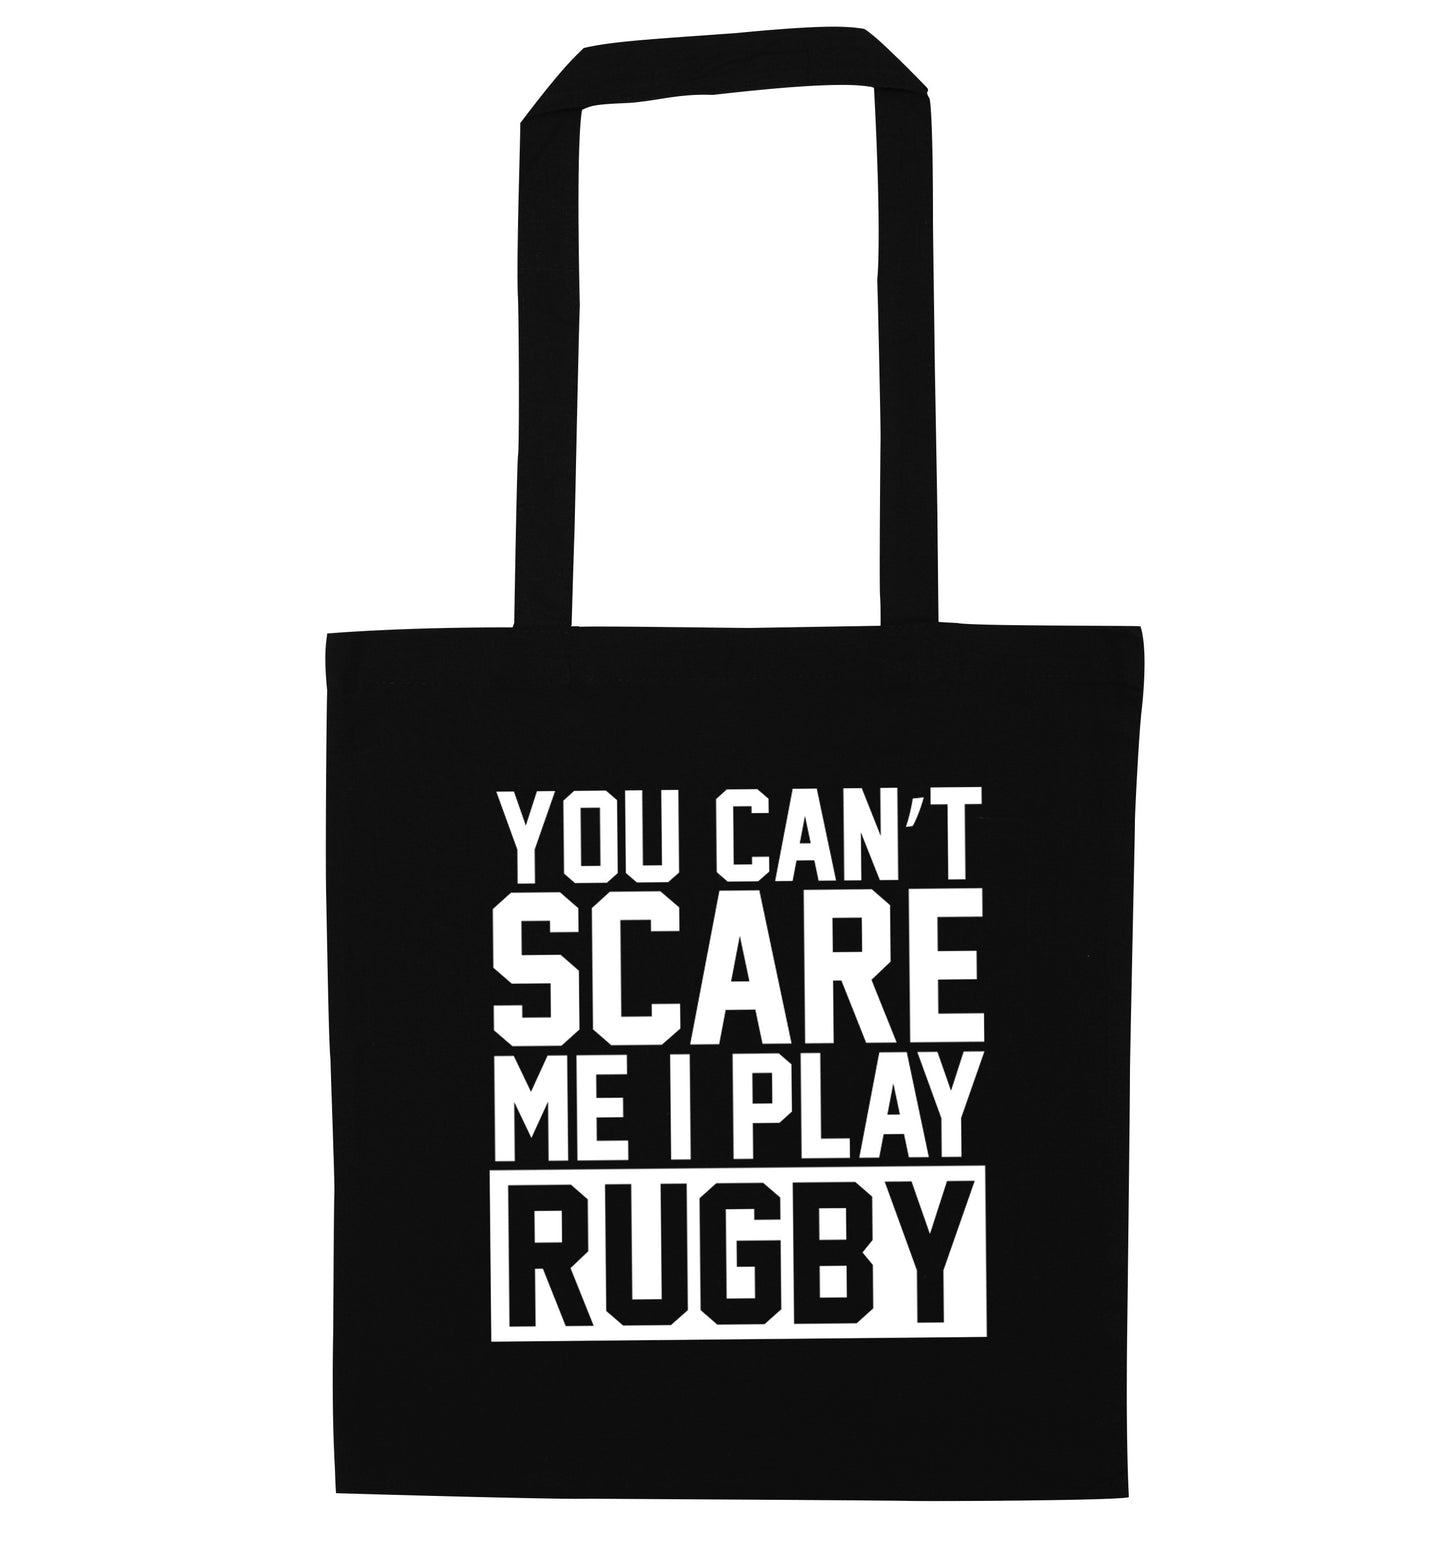 You can't scare me I play rugby black tote bag